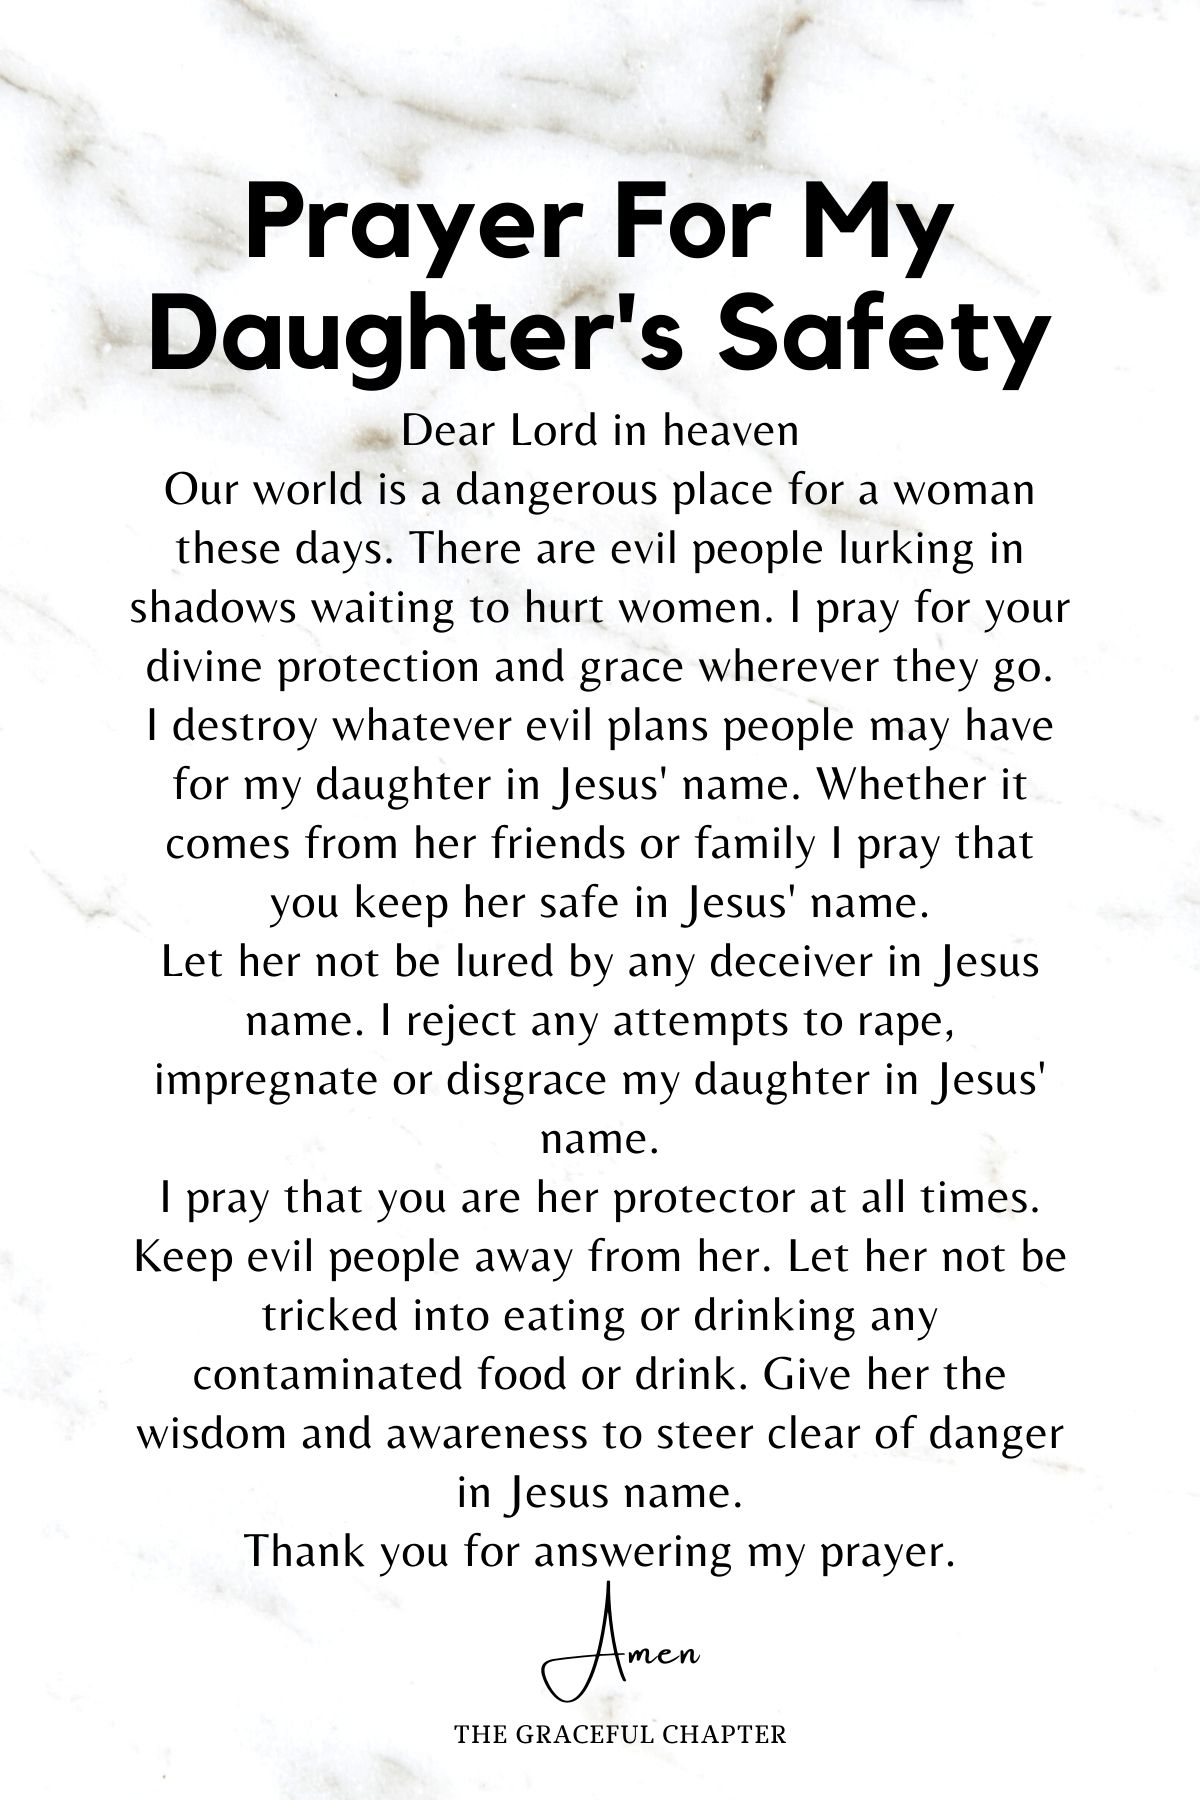 Prayer for my daughter's safety